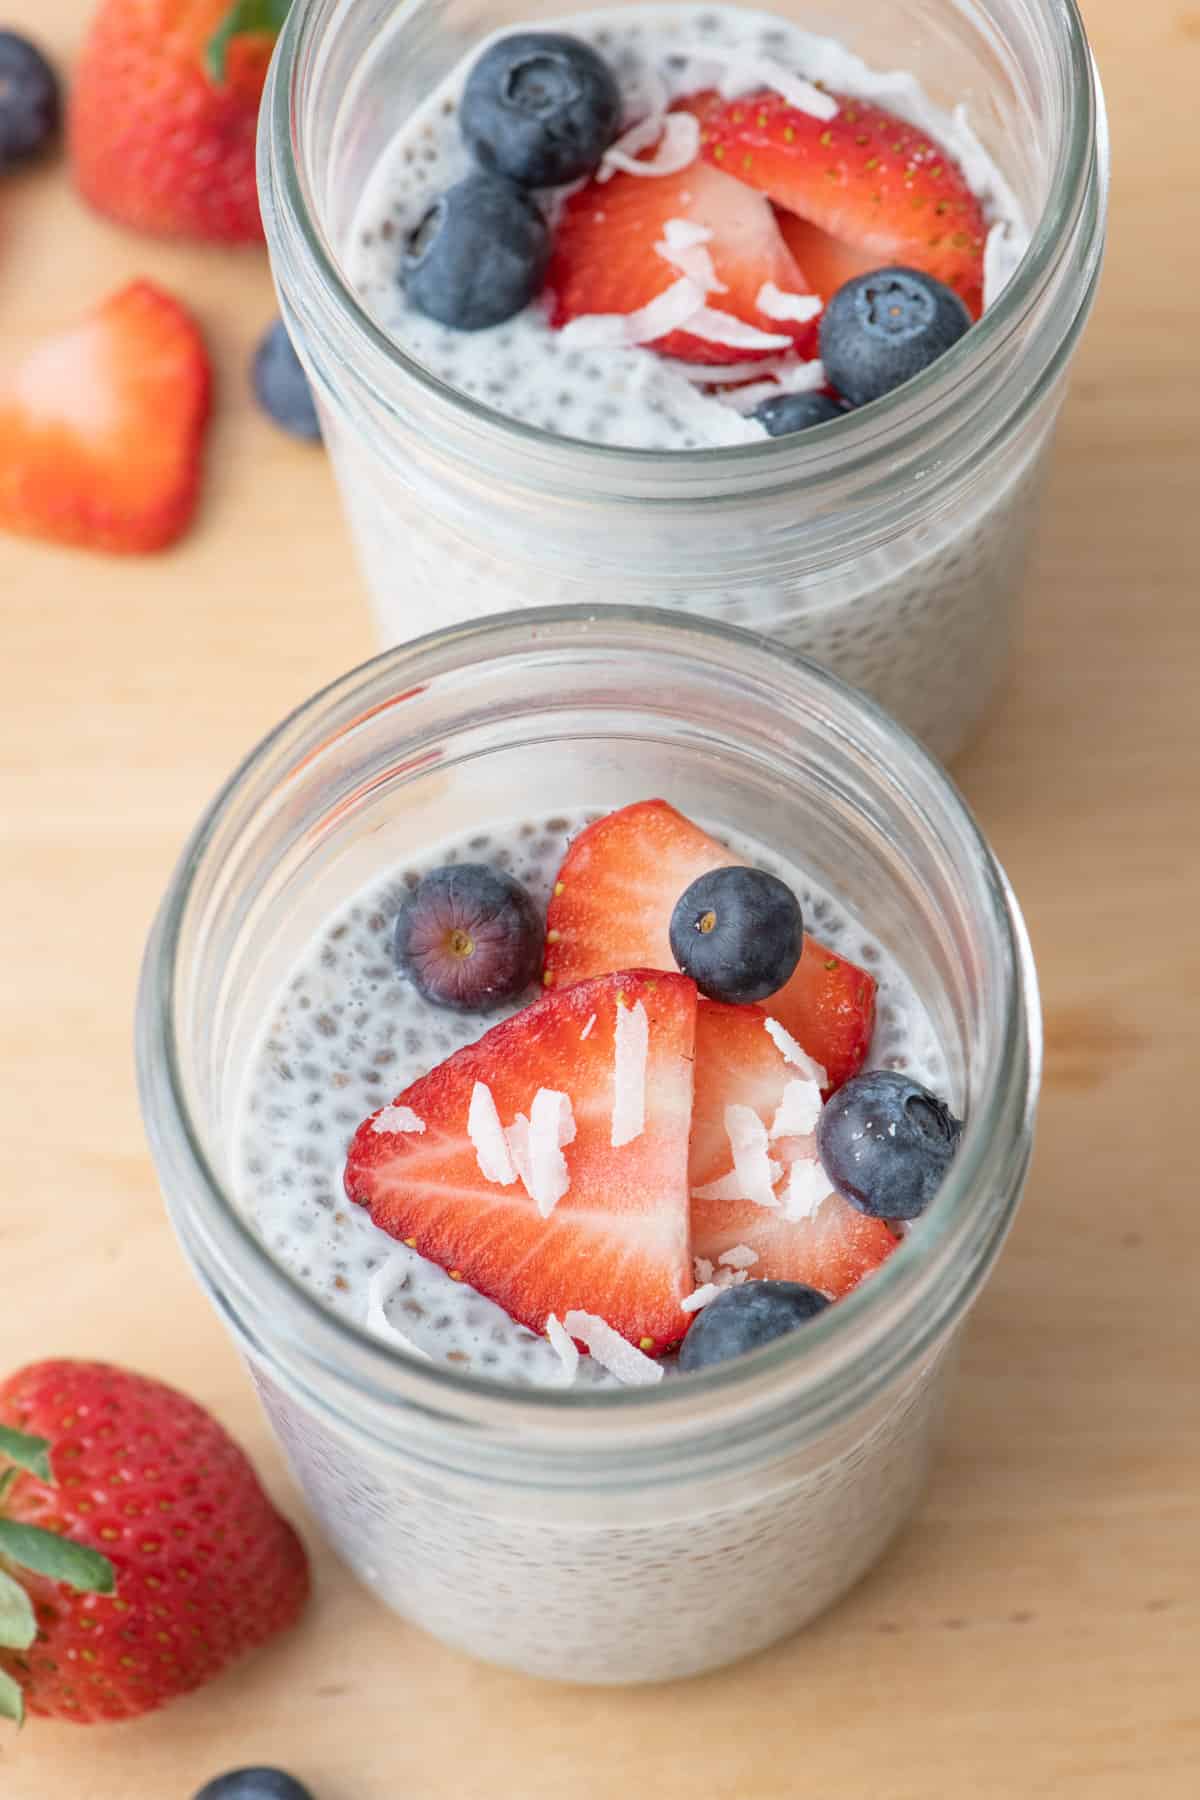 This 3-Ingredient Chia Pudding is made with almond milk, chia seeds & sweetener of choice; it's a healthy snack loaded with protein, fiber and healthy fats!